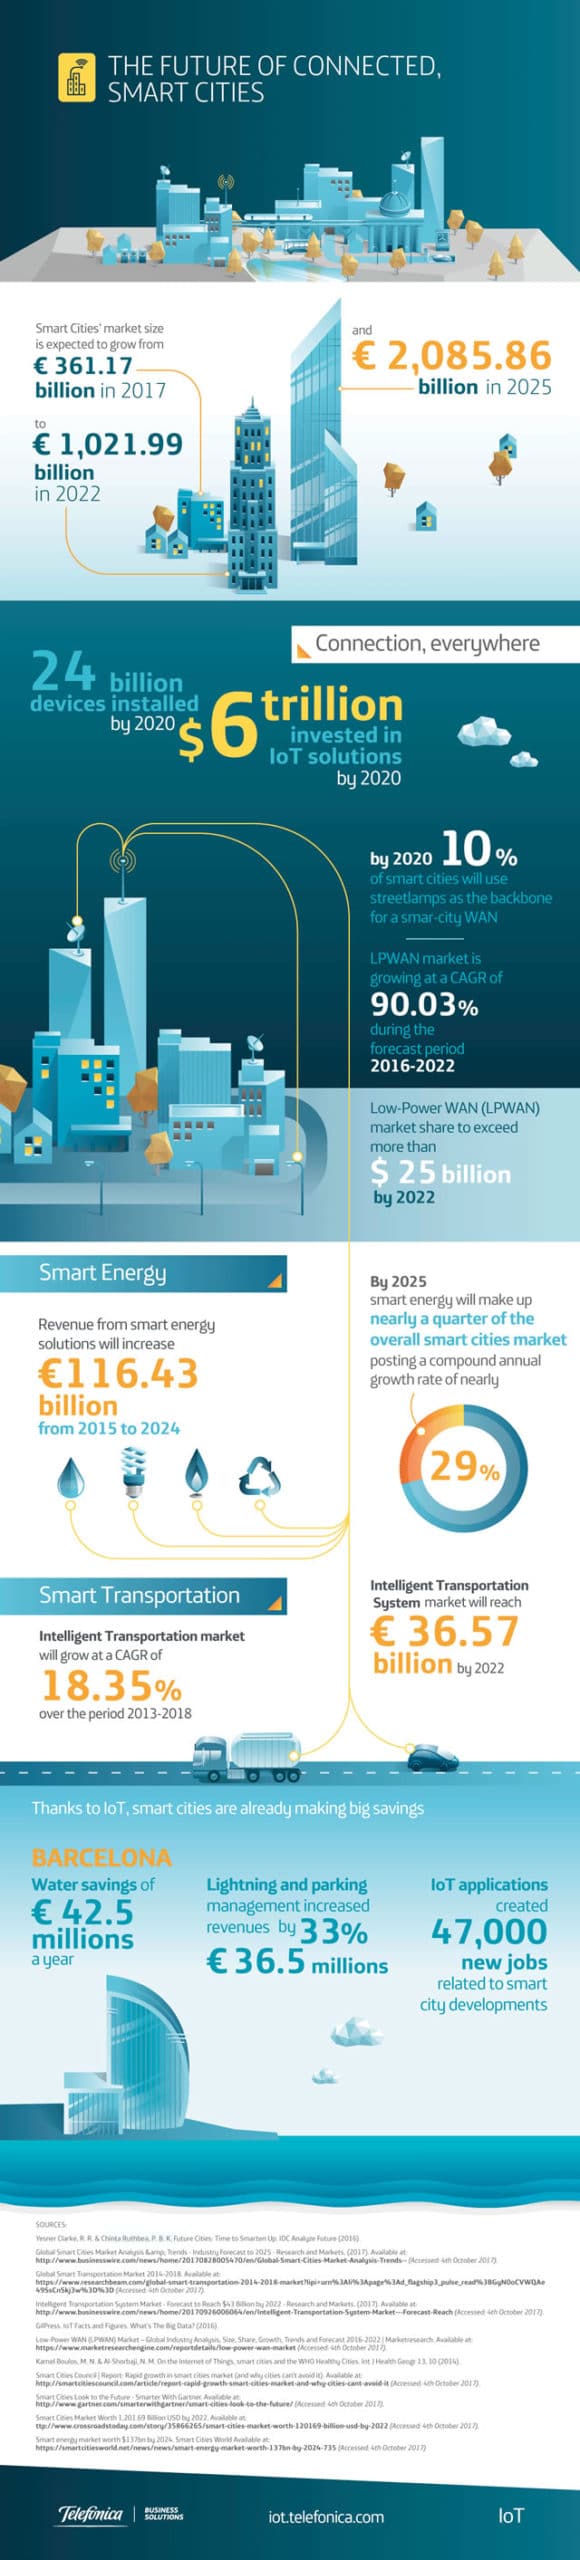 Future smart cities infographic by Telefonica IoT - source